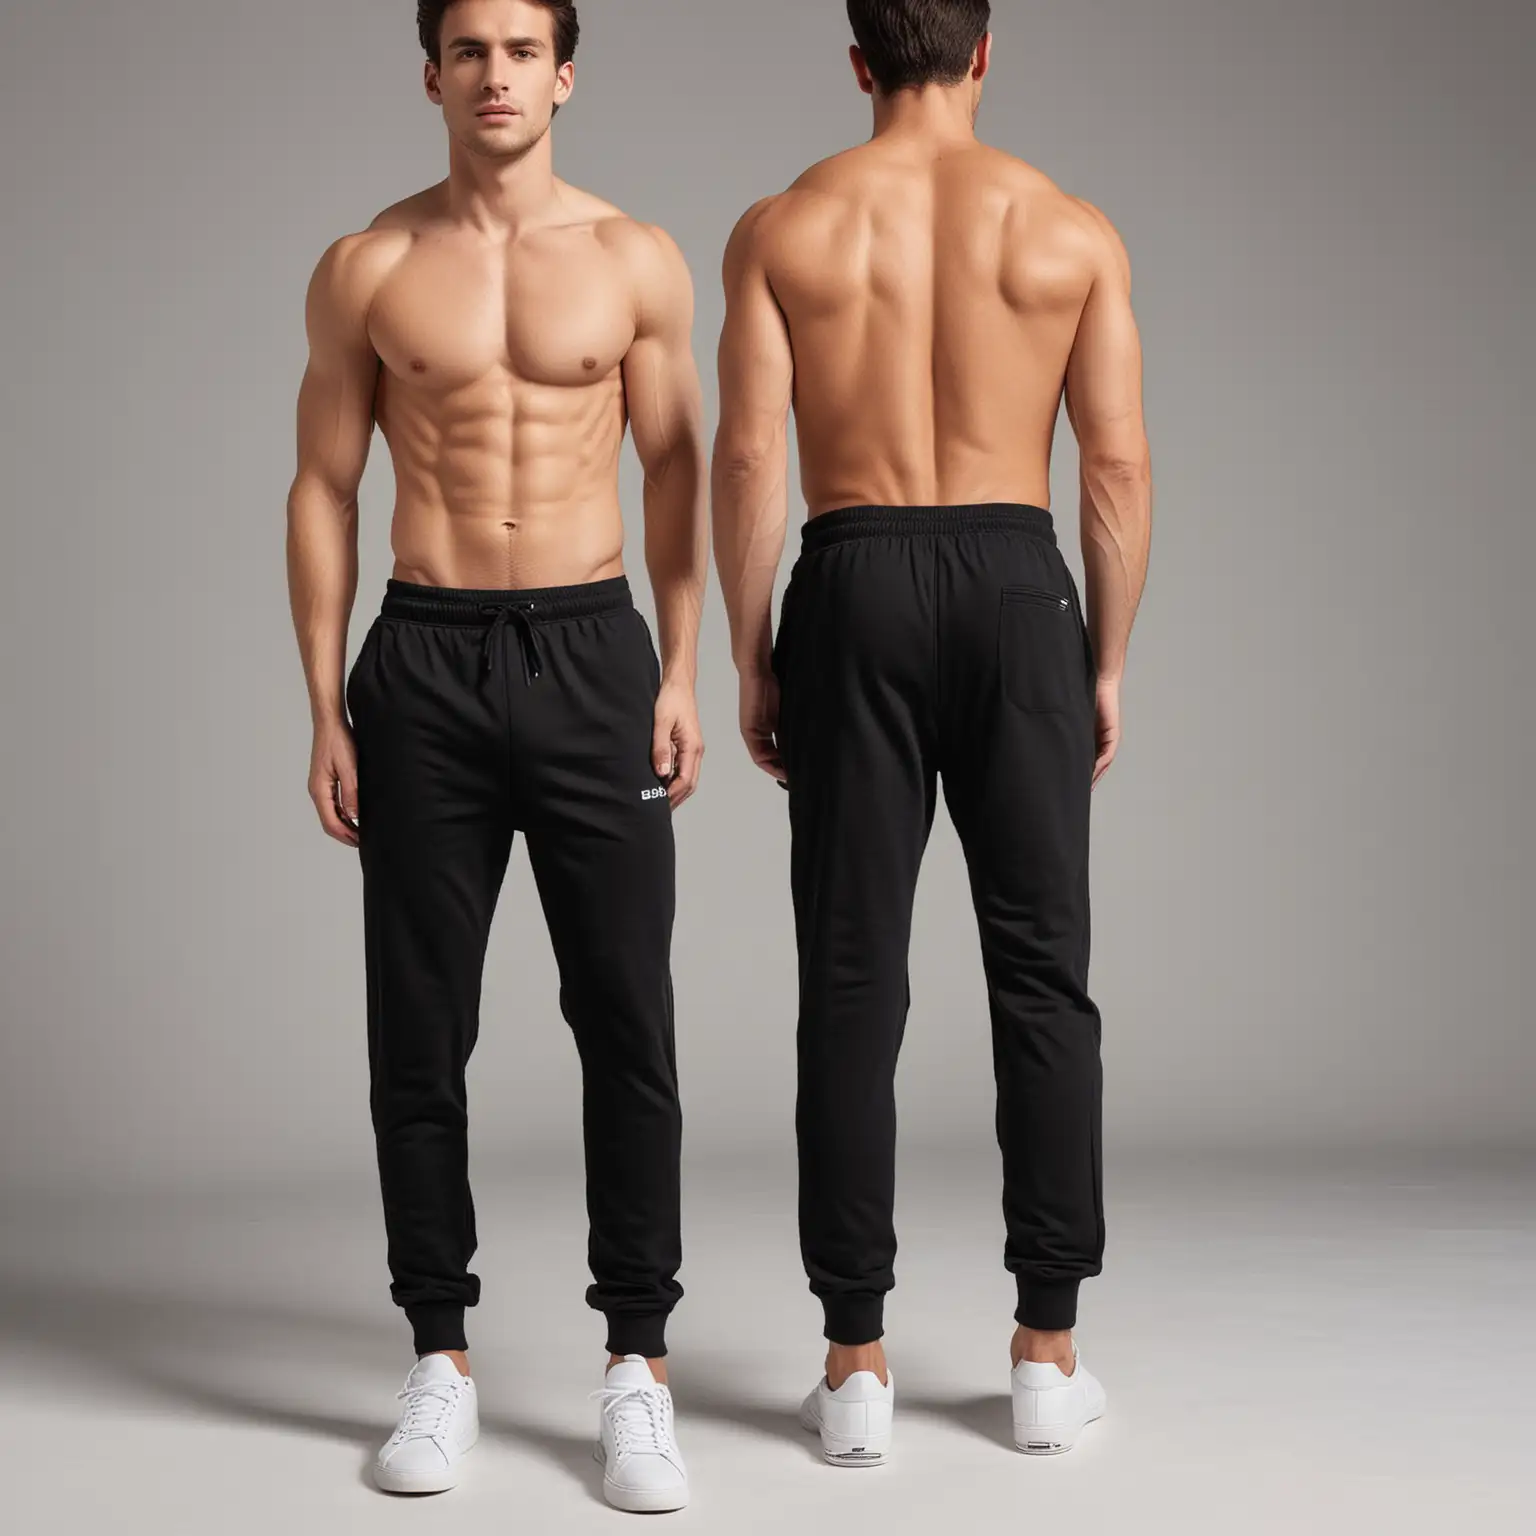 Man Wearing Black Cotton Track Pants for Gym Athletic Apparel Photoshoot